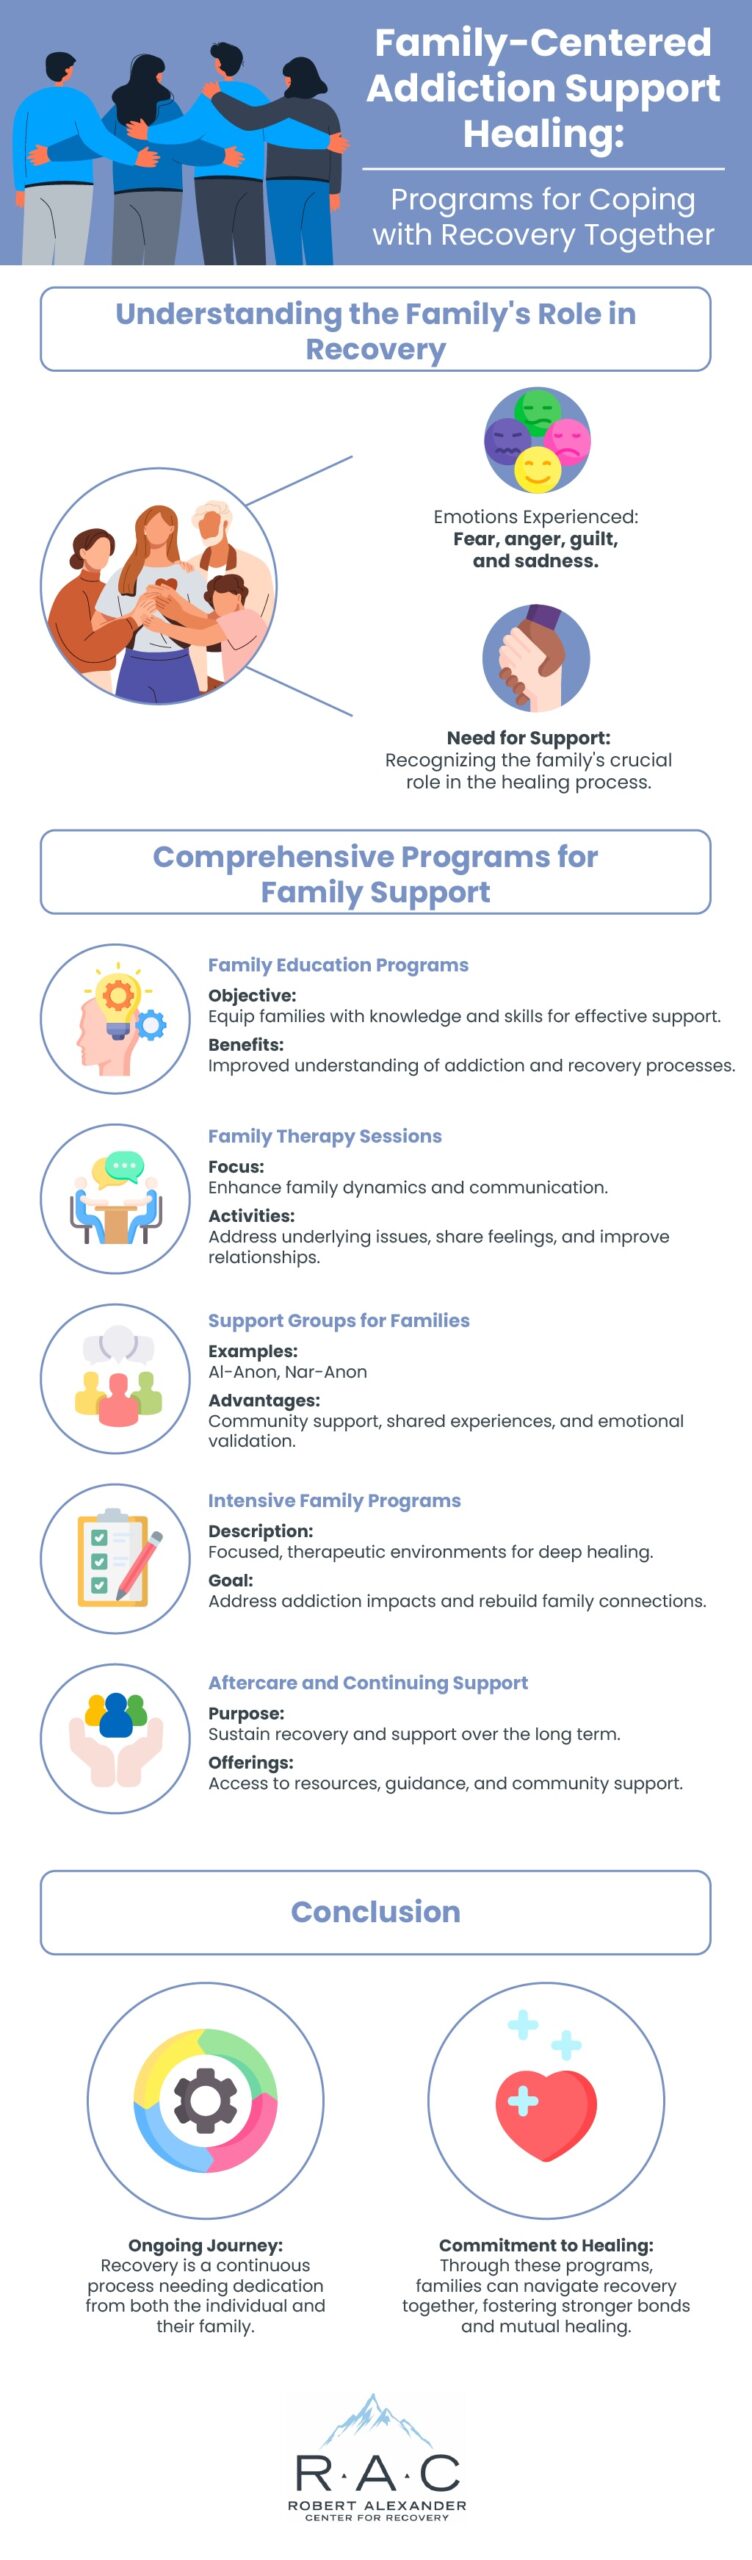 Family Centered Addiction Support Healing Programs for Coping with Recovery Together Infographic 1000px scaled